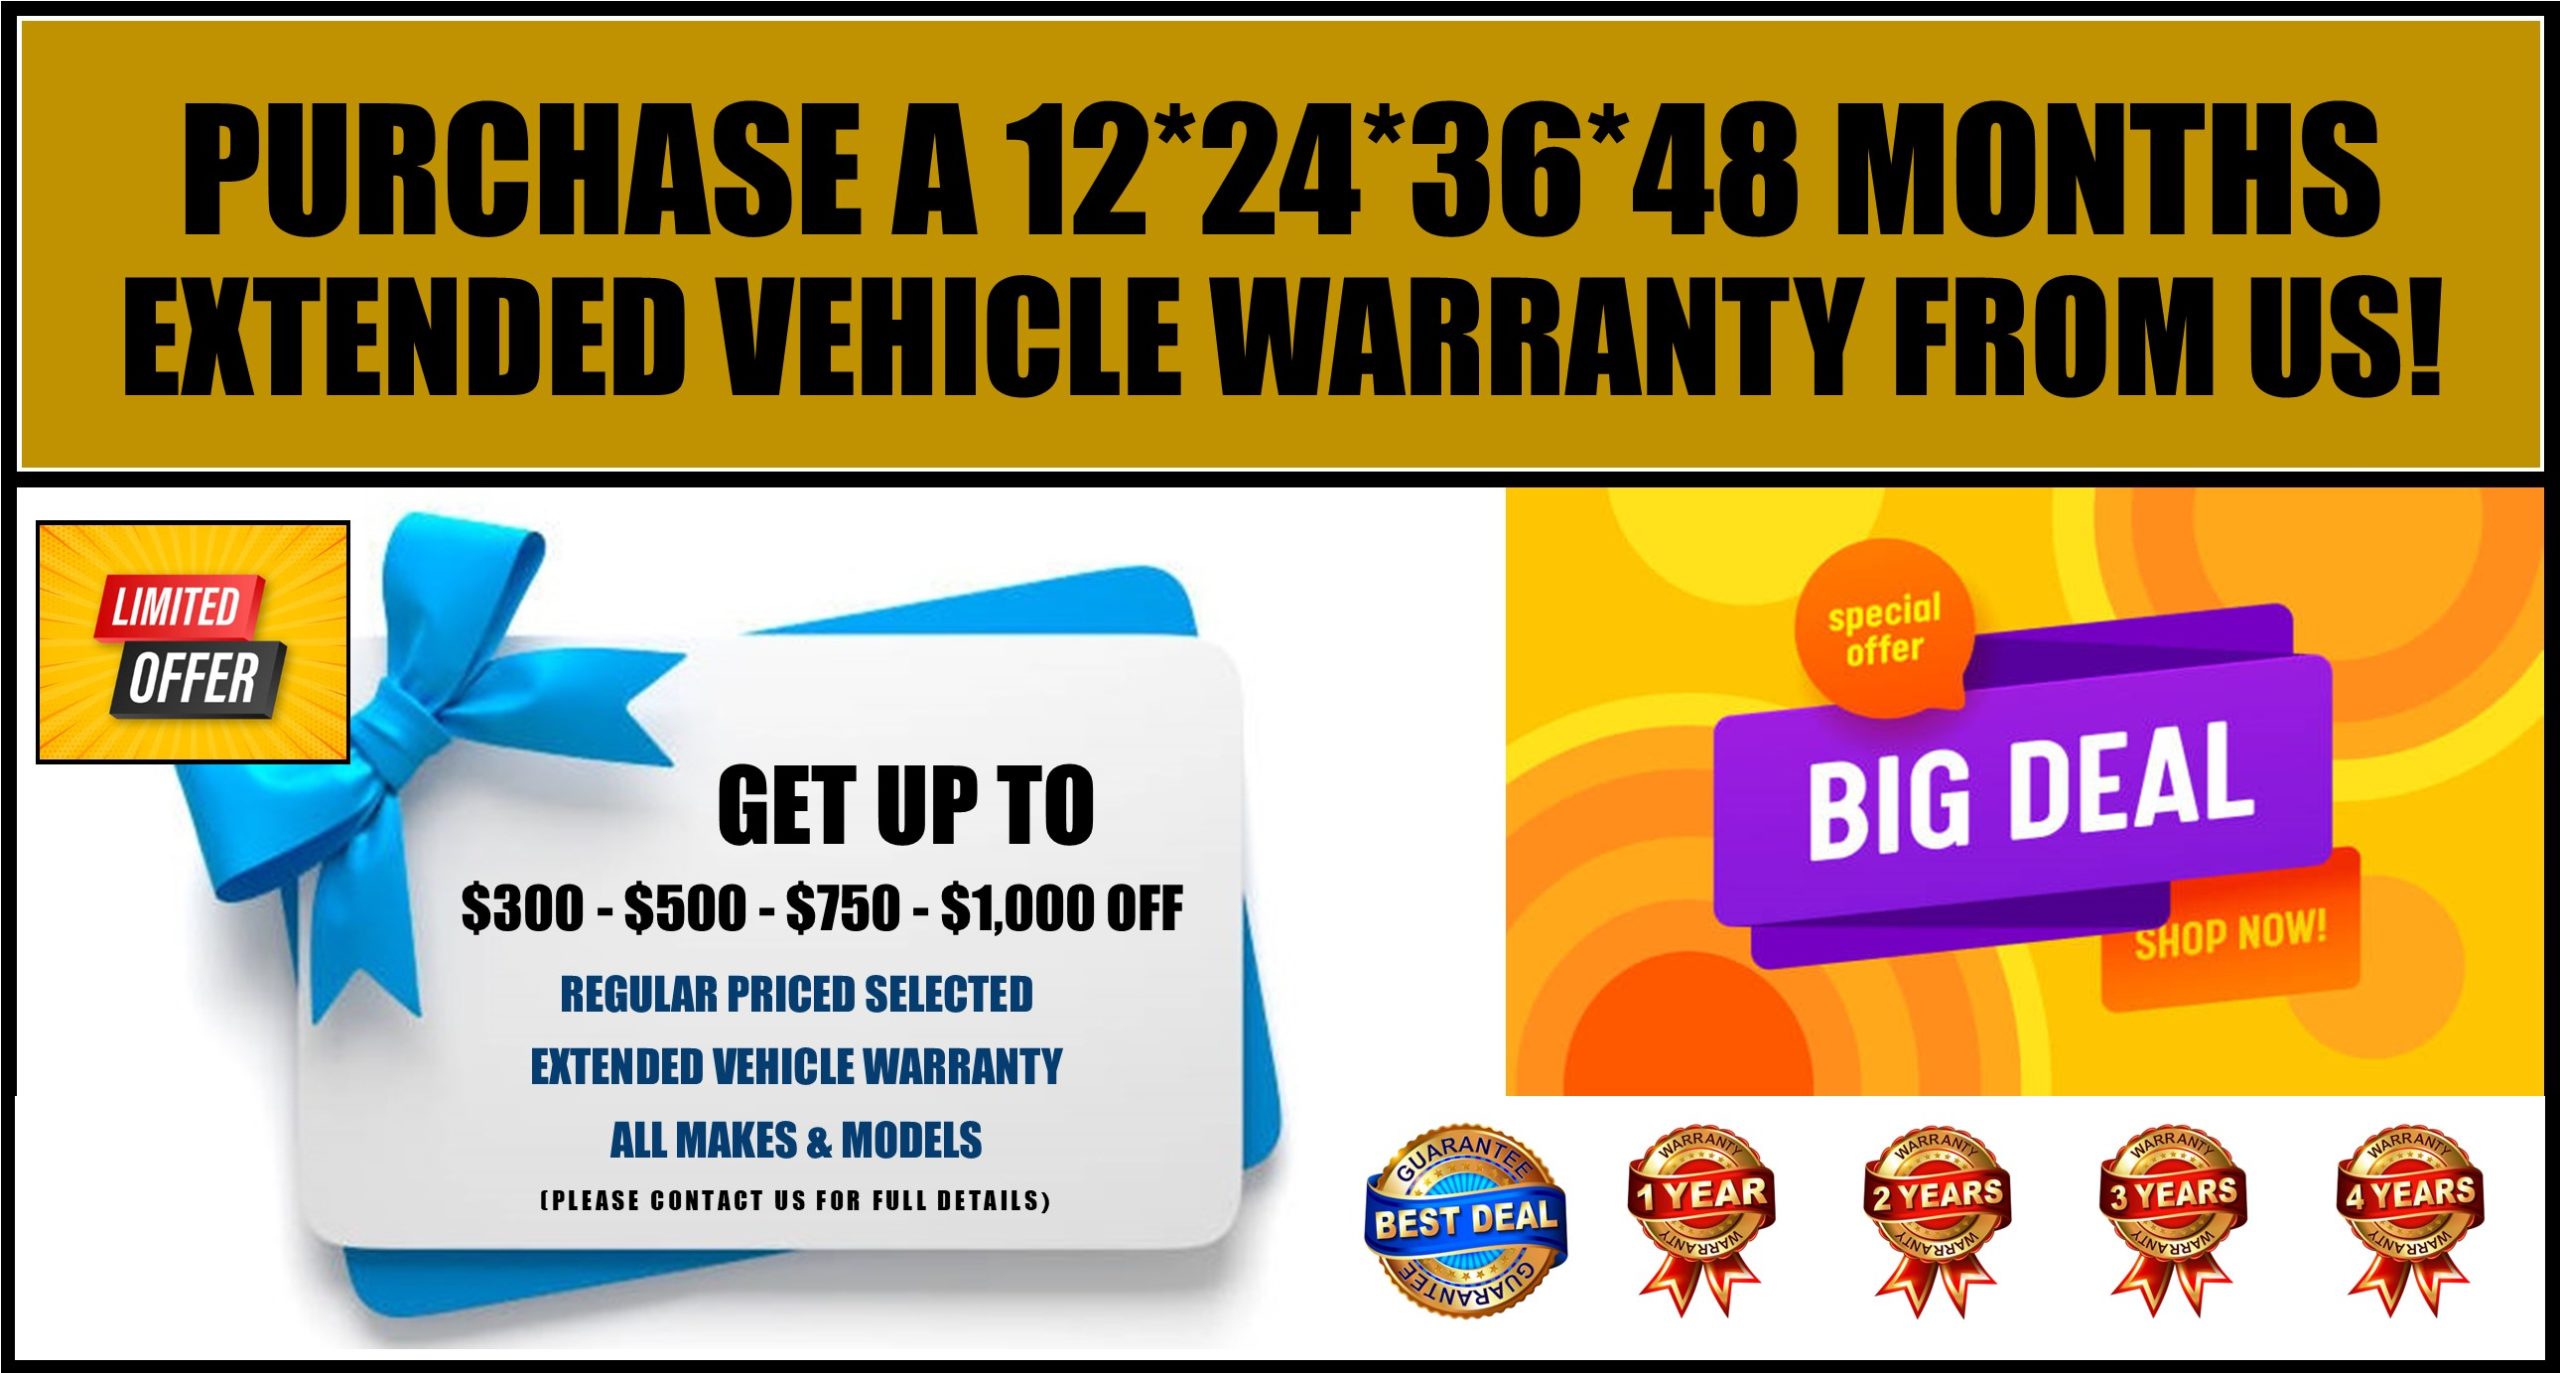 We Sell Extended Vehicle Warranty Coverage